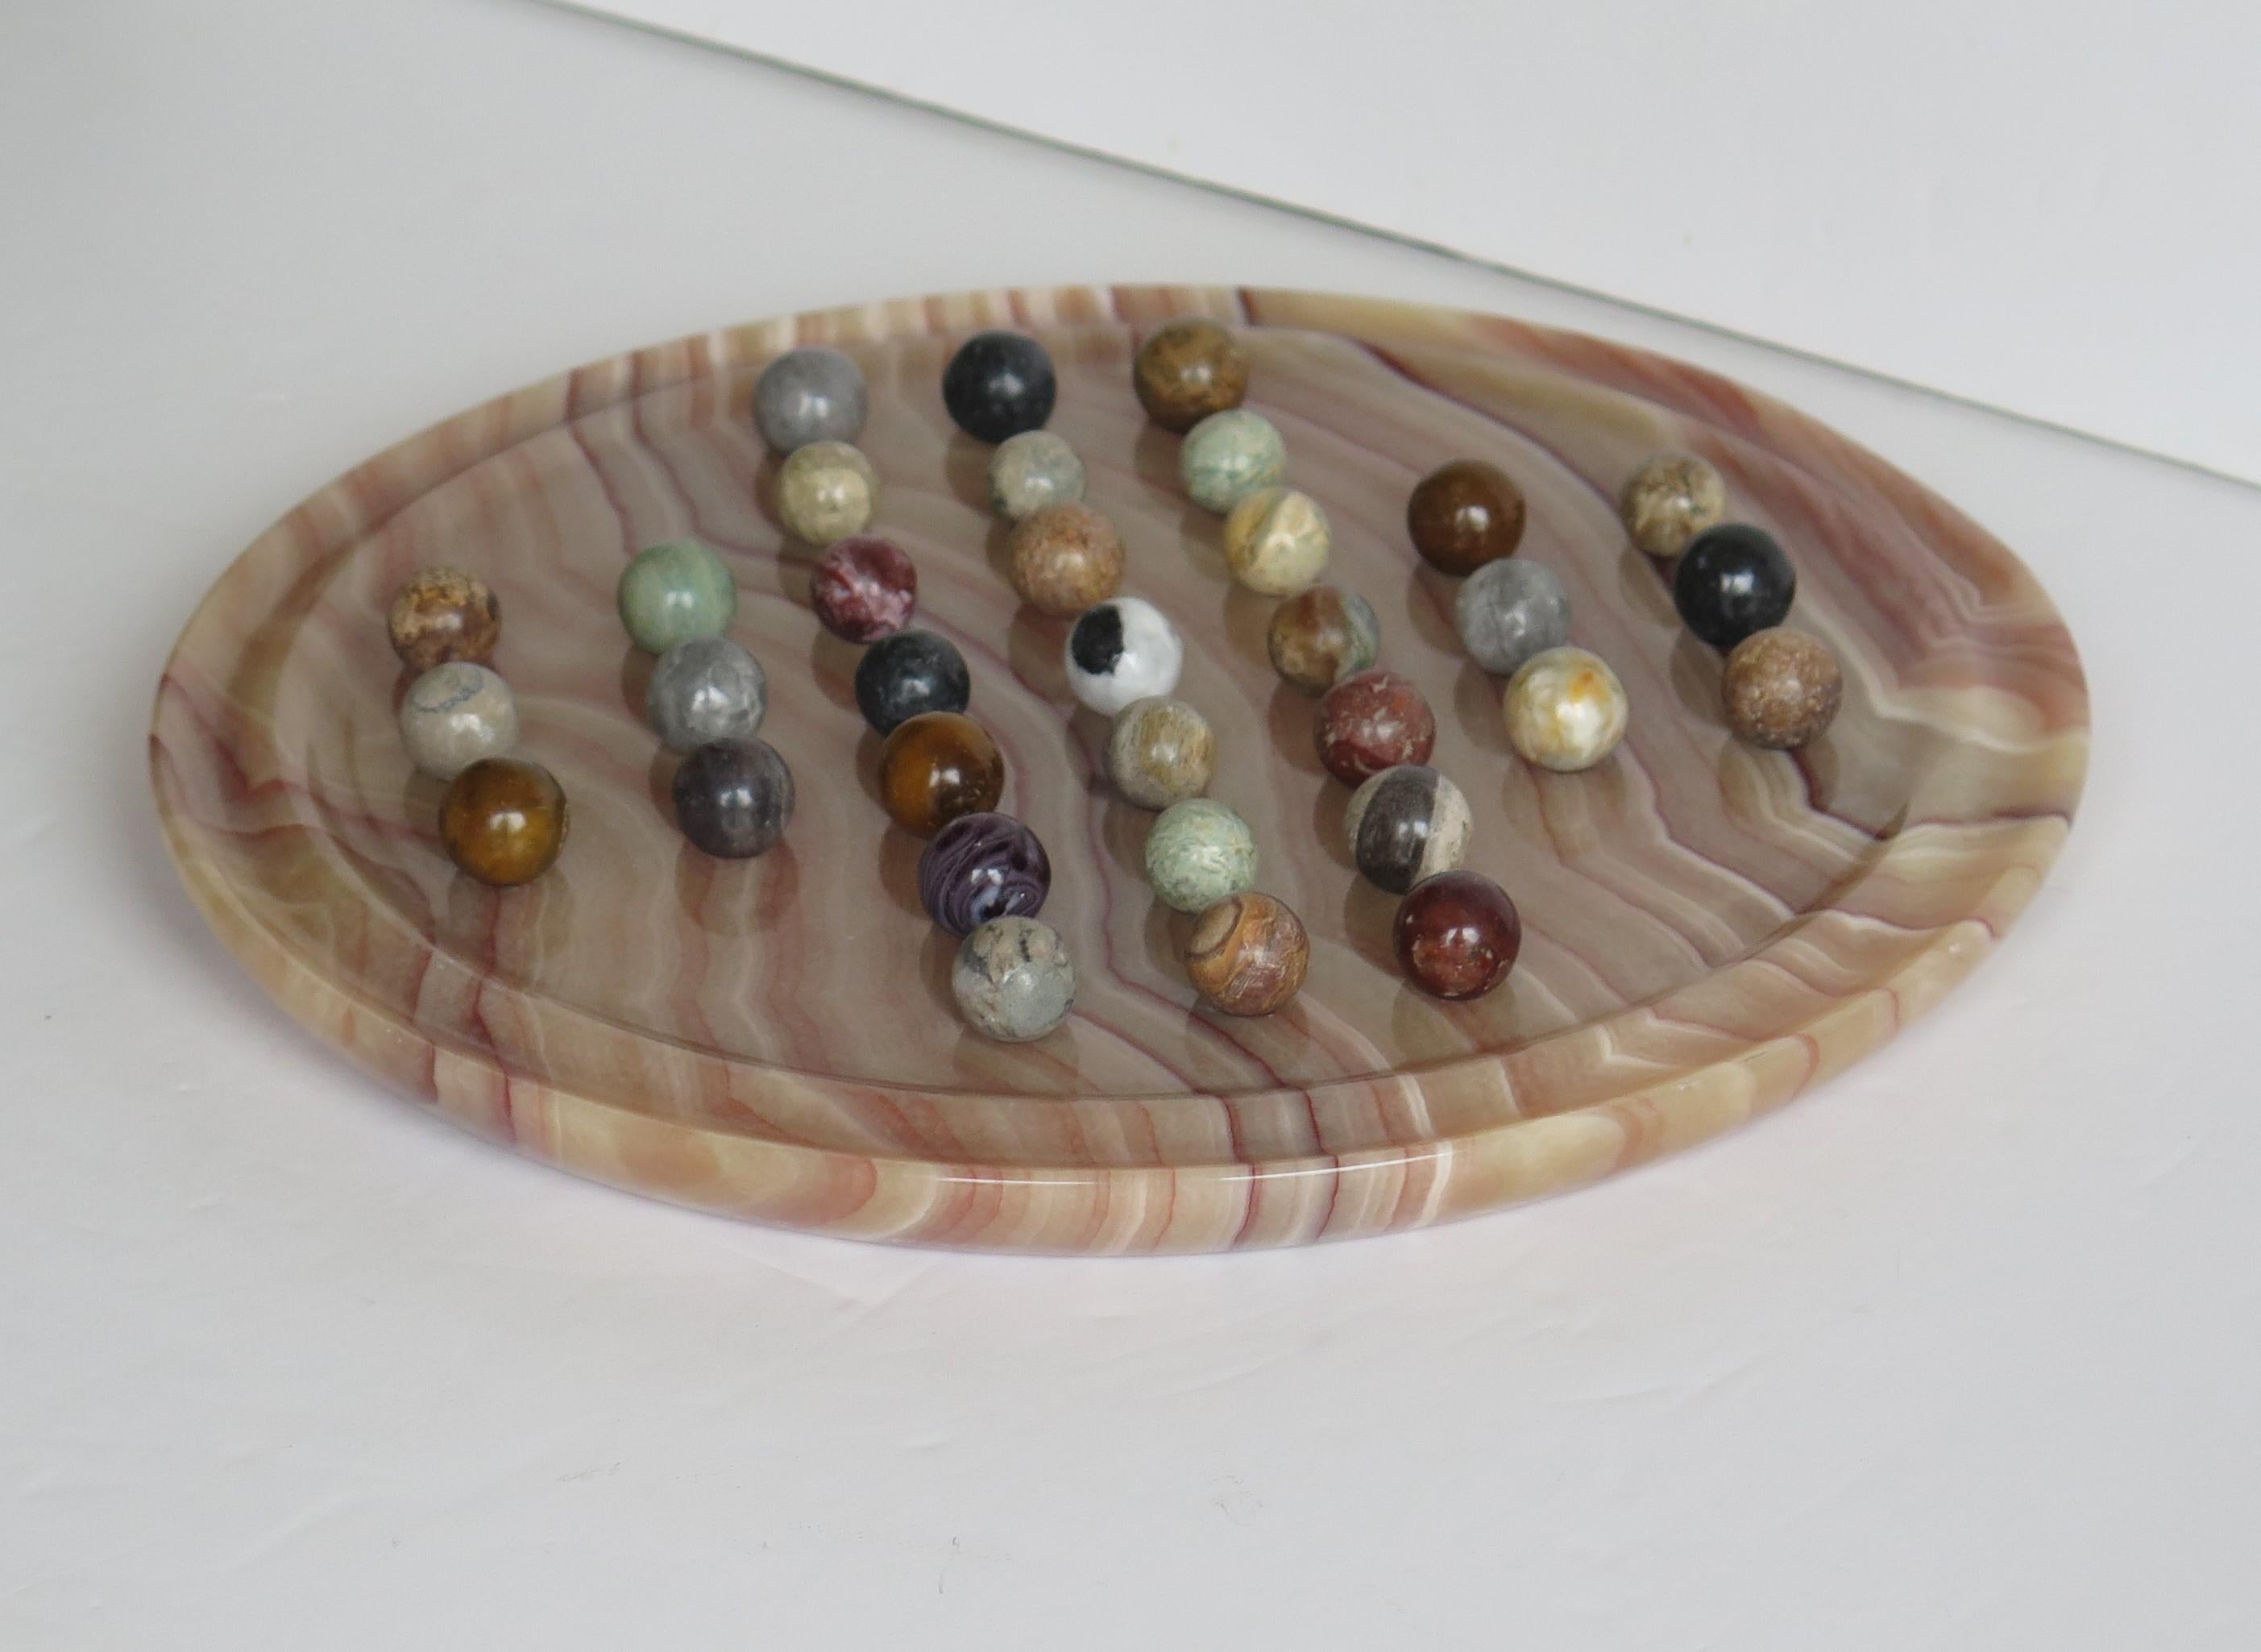 20th Century Marble Solitaire Board Game Natural Stone Board & 33 Agate Marbles, circa 1950